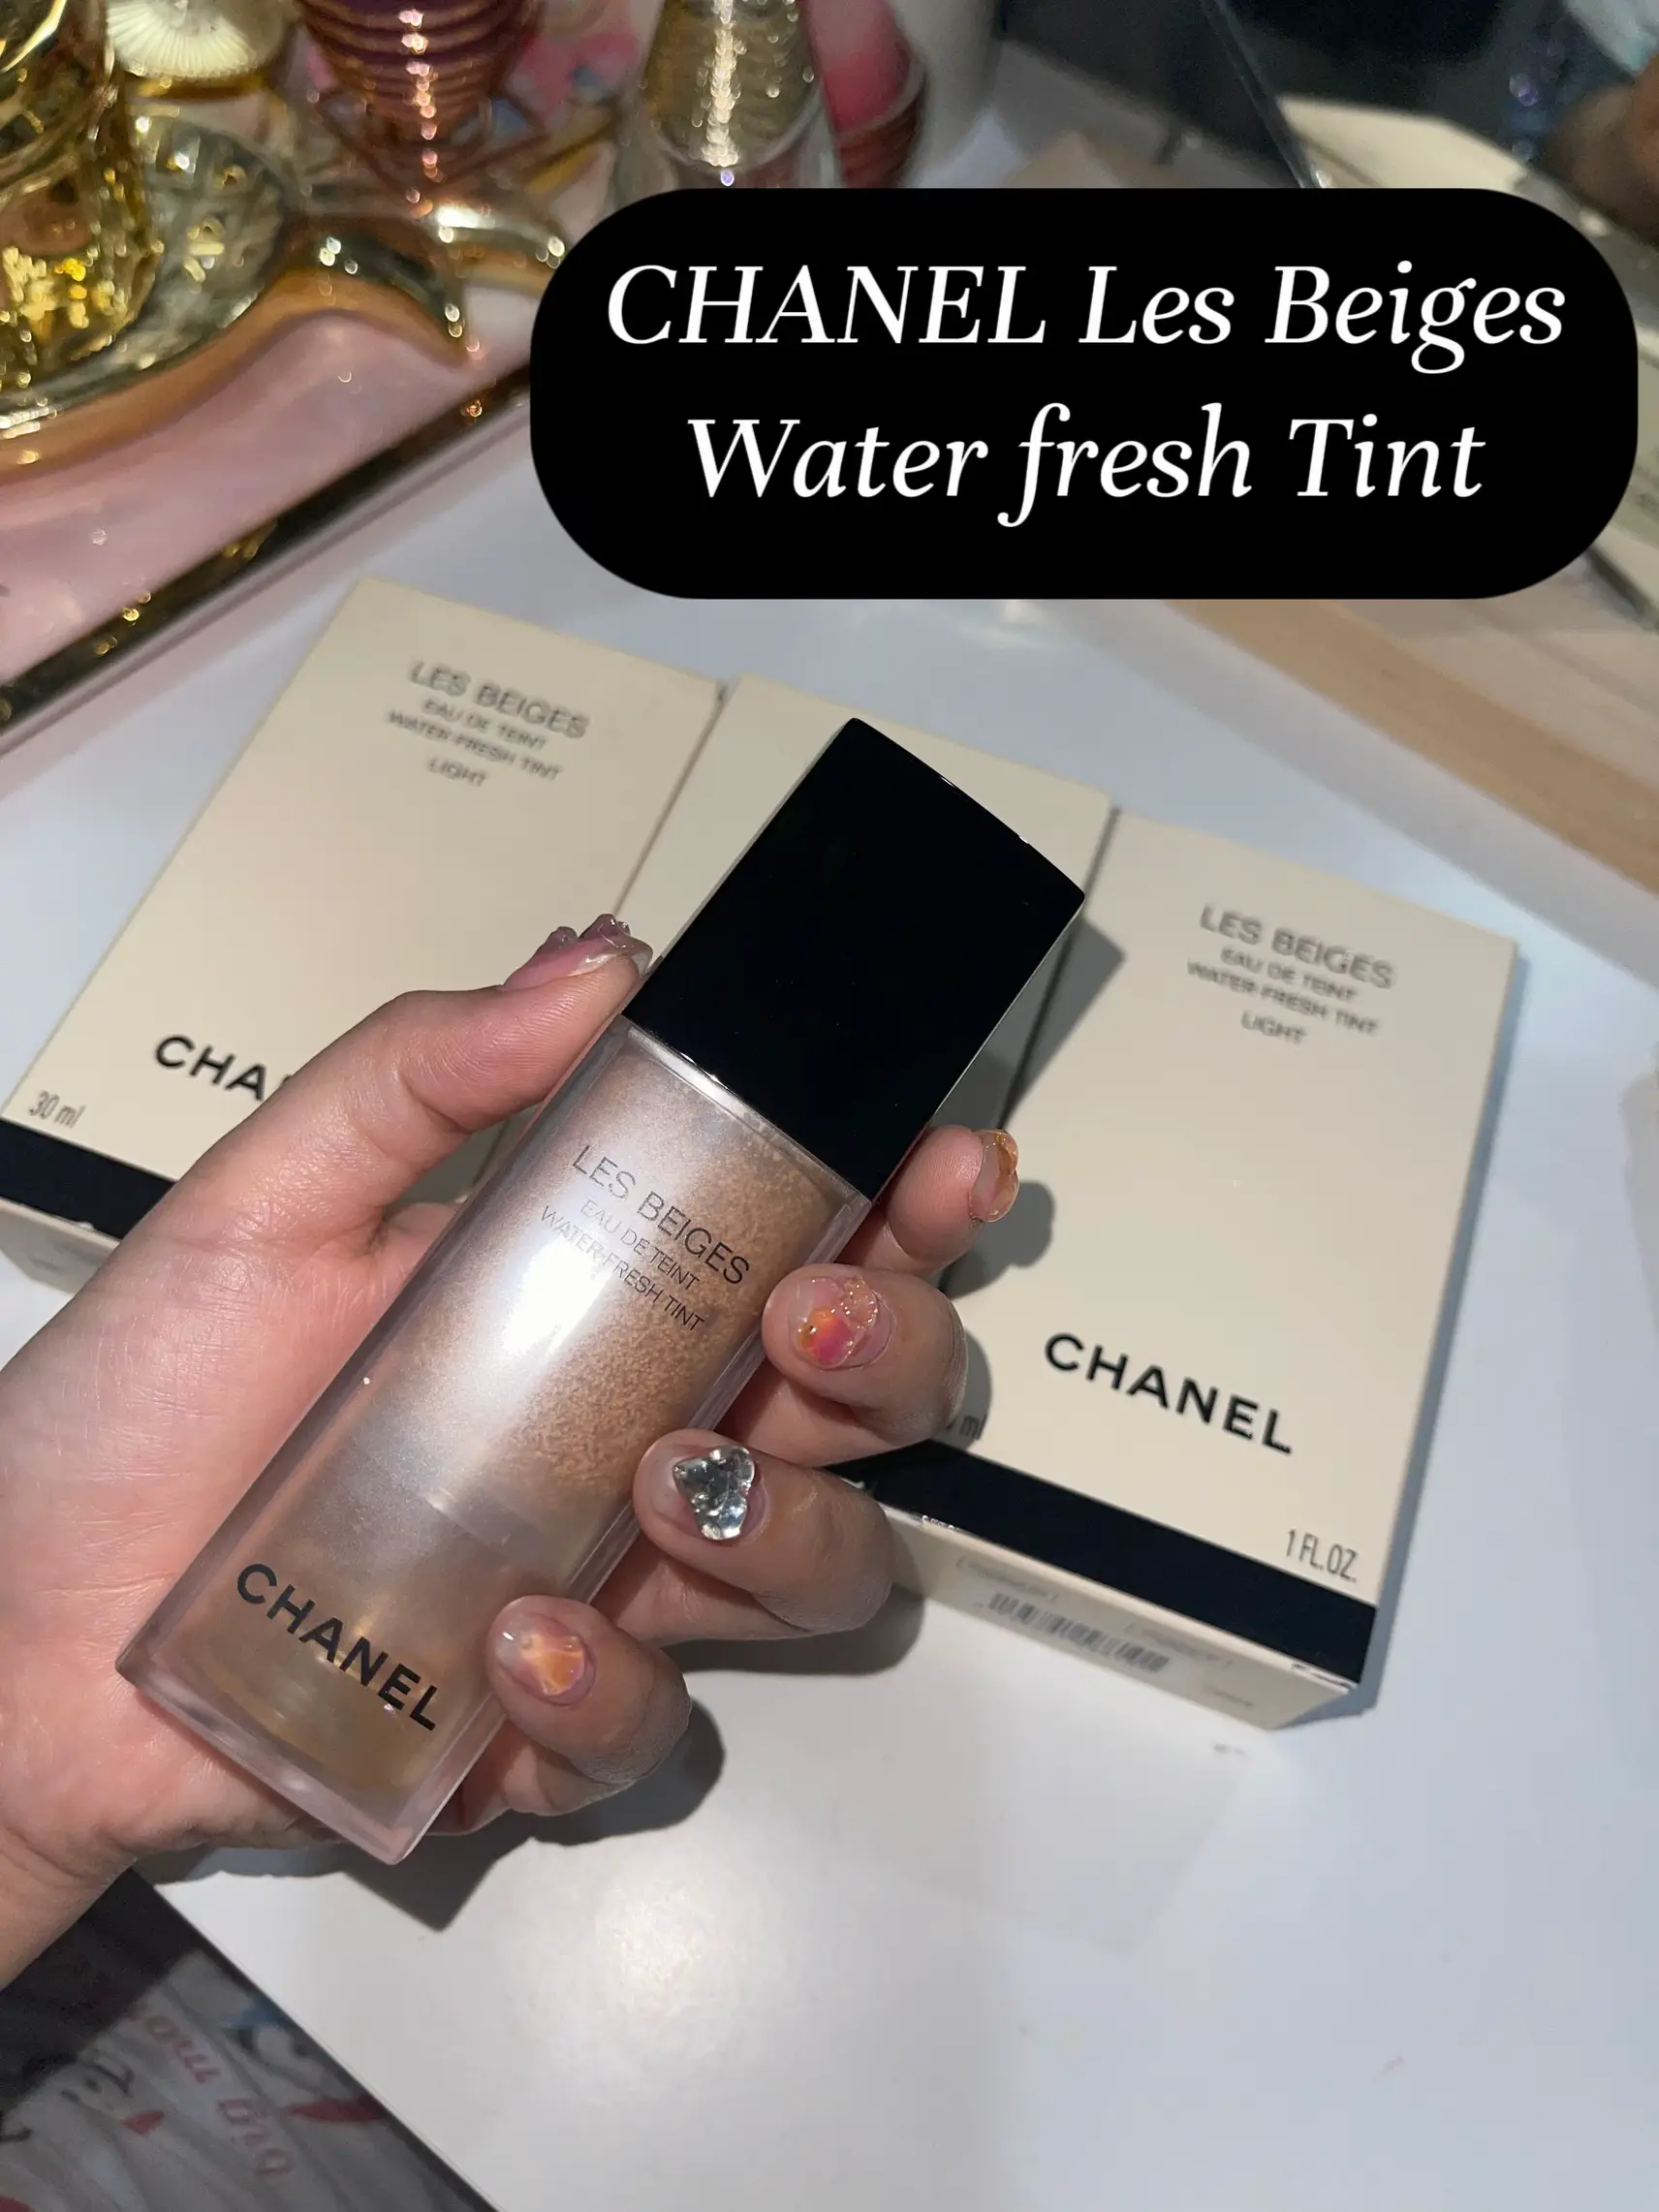 Cosmetics like and buy repeat dior, chanel